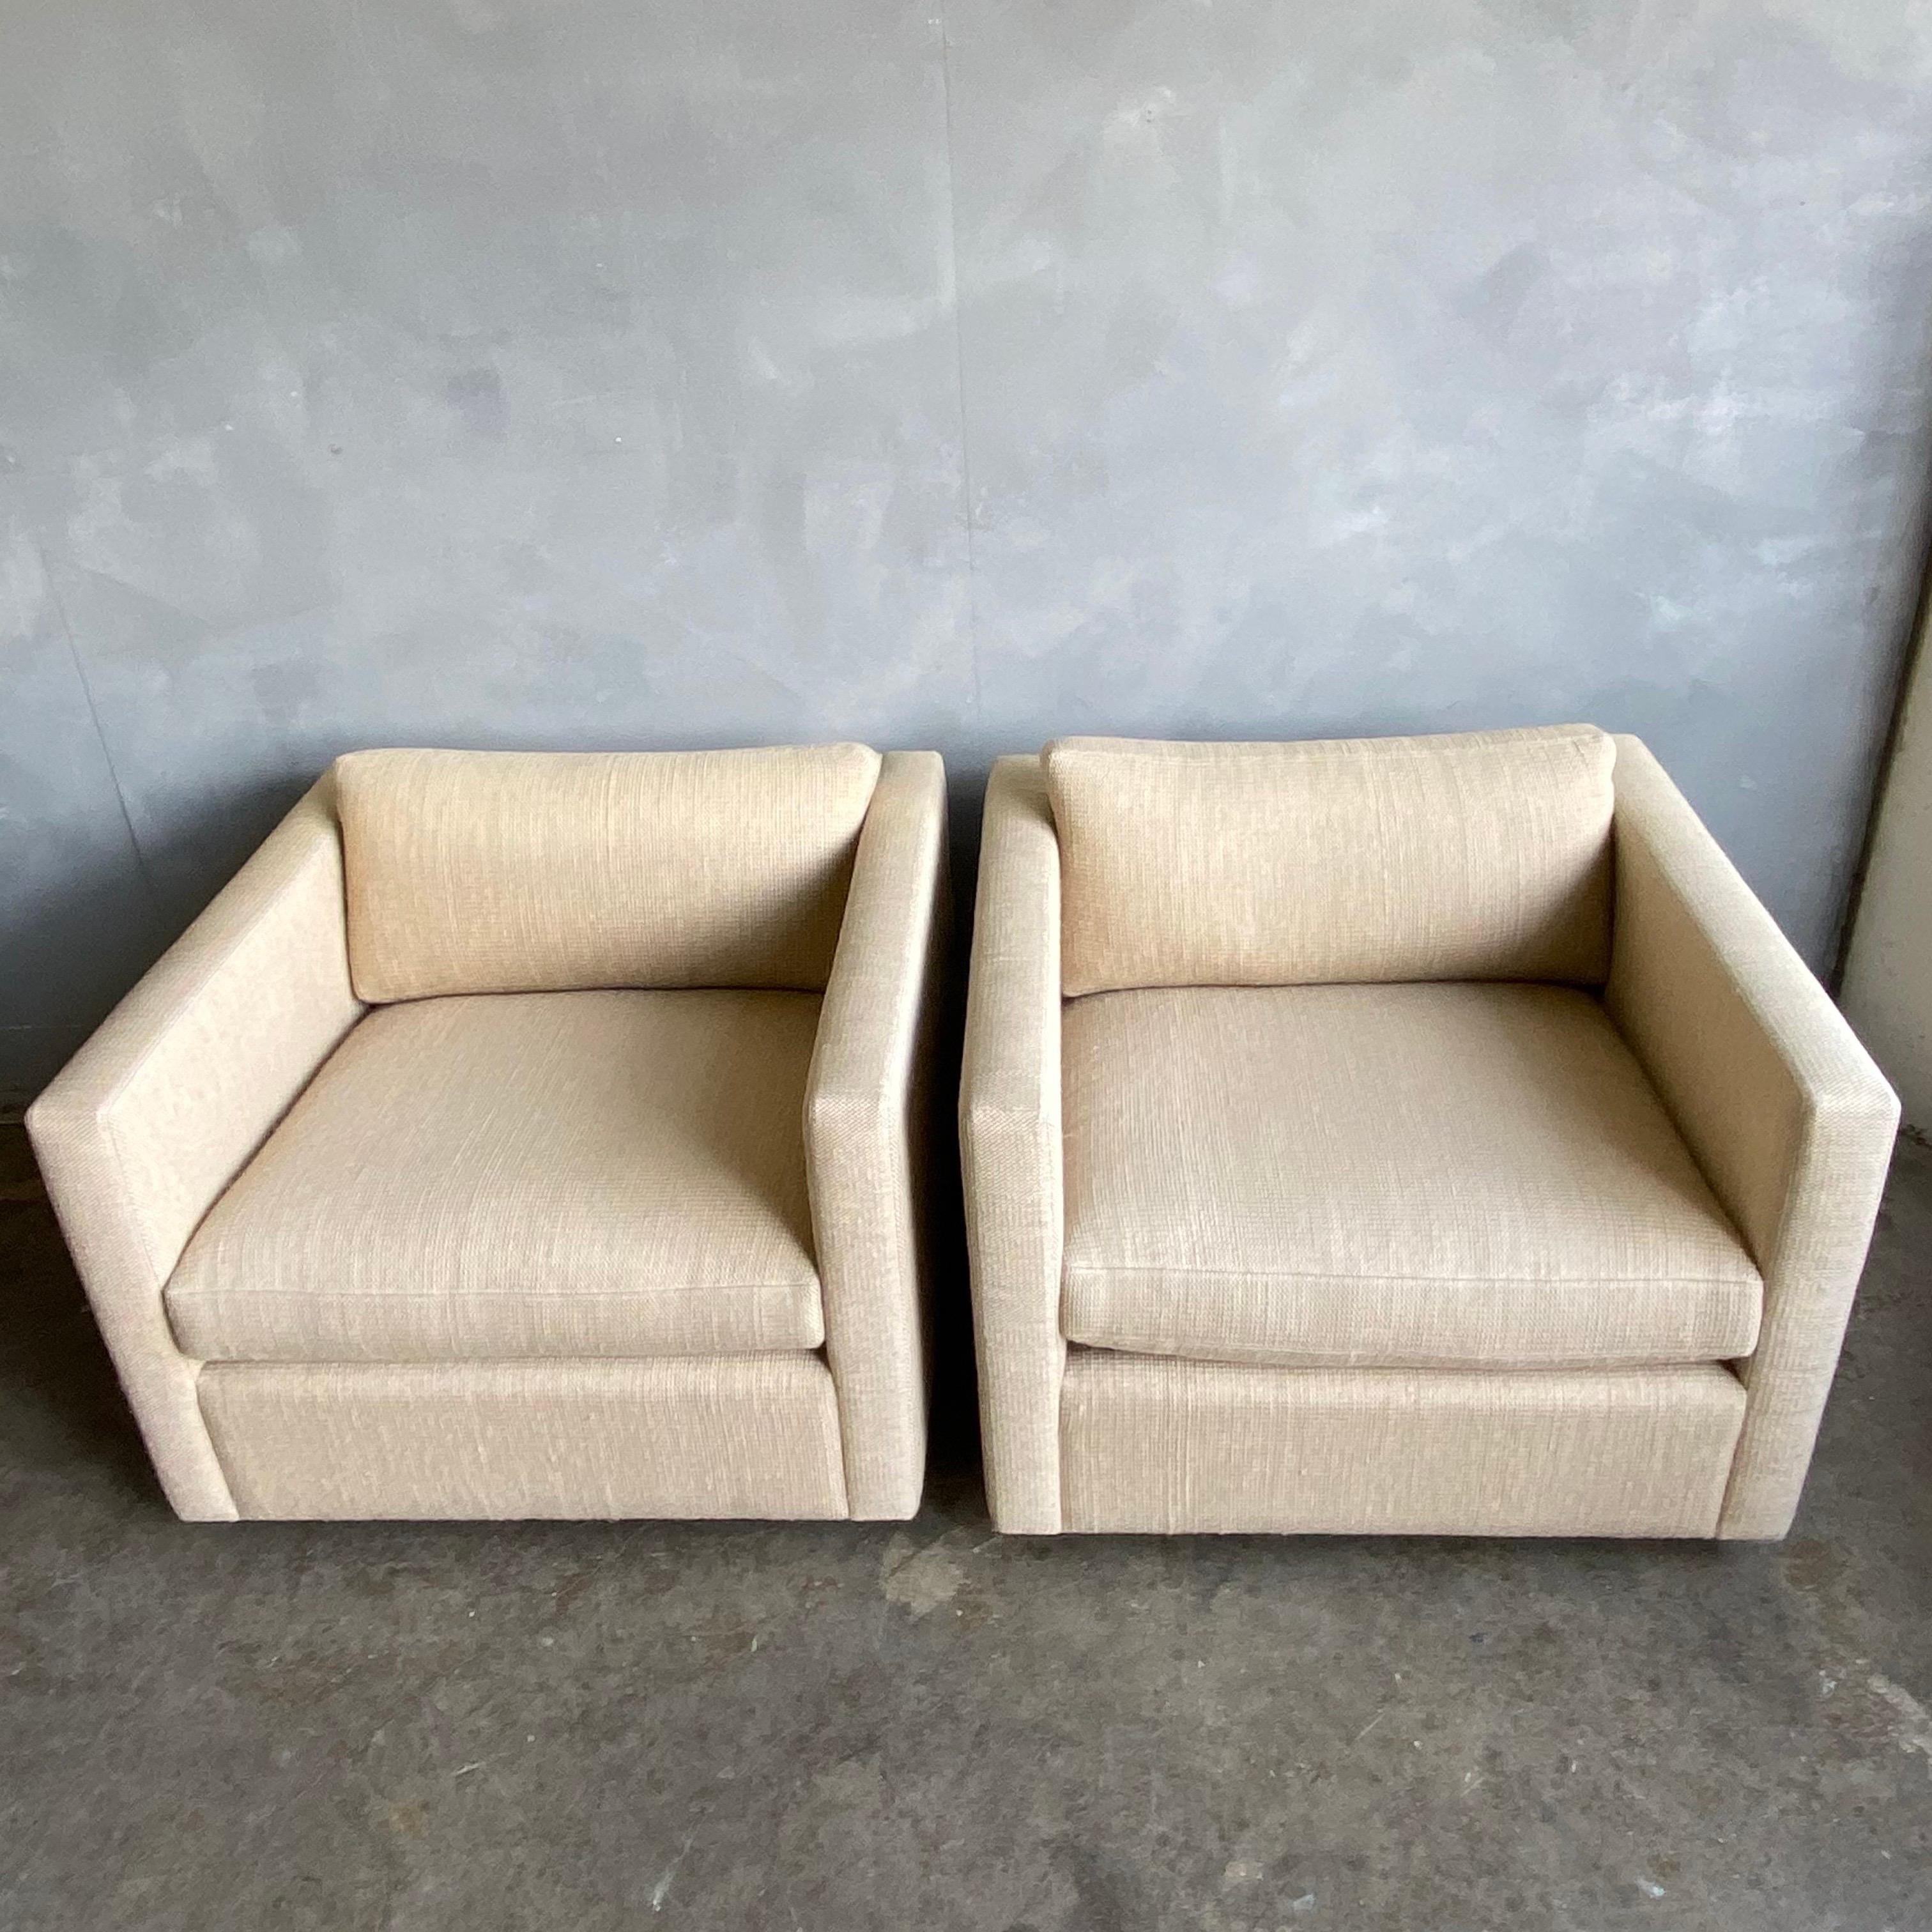 American Midcentury Cube Lounge Chairs for Knoll